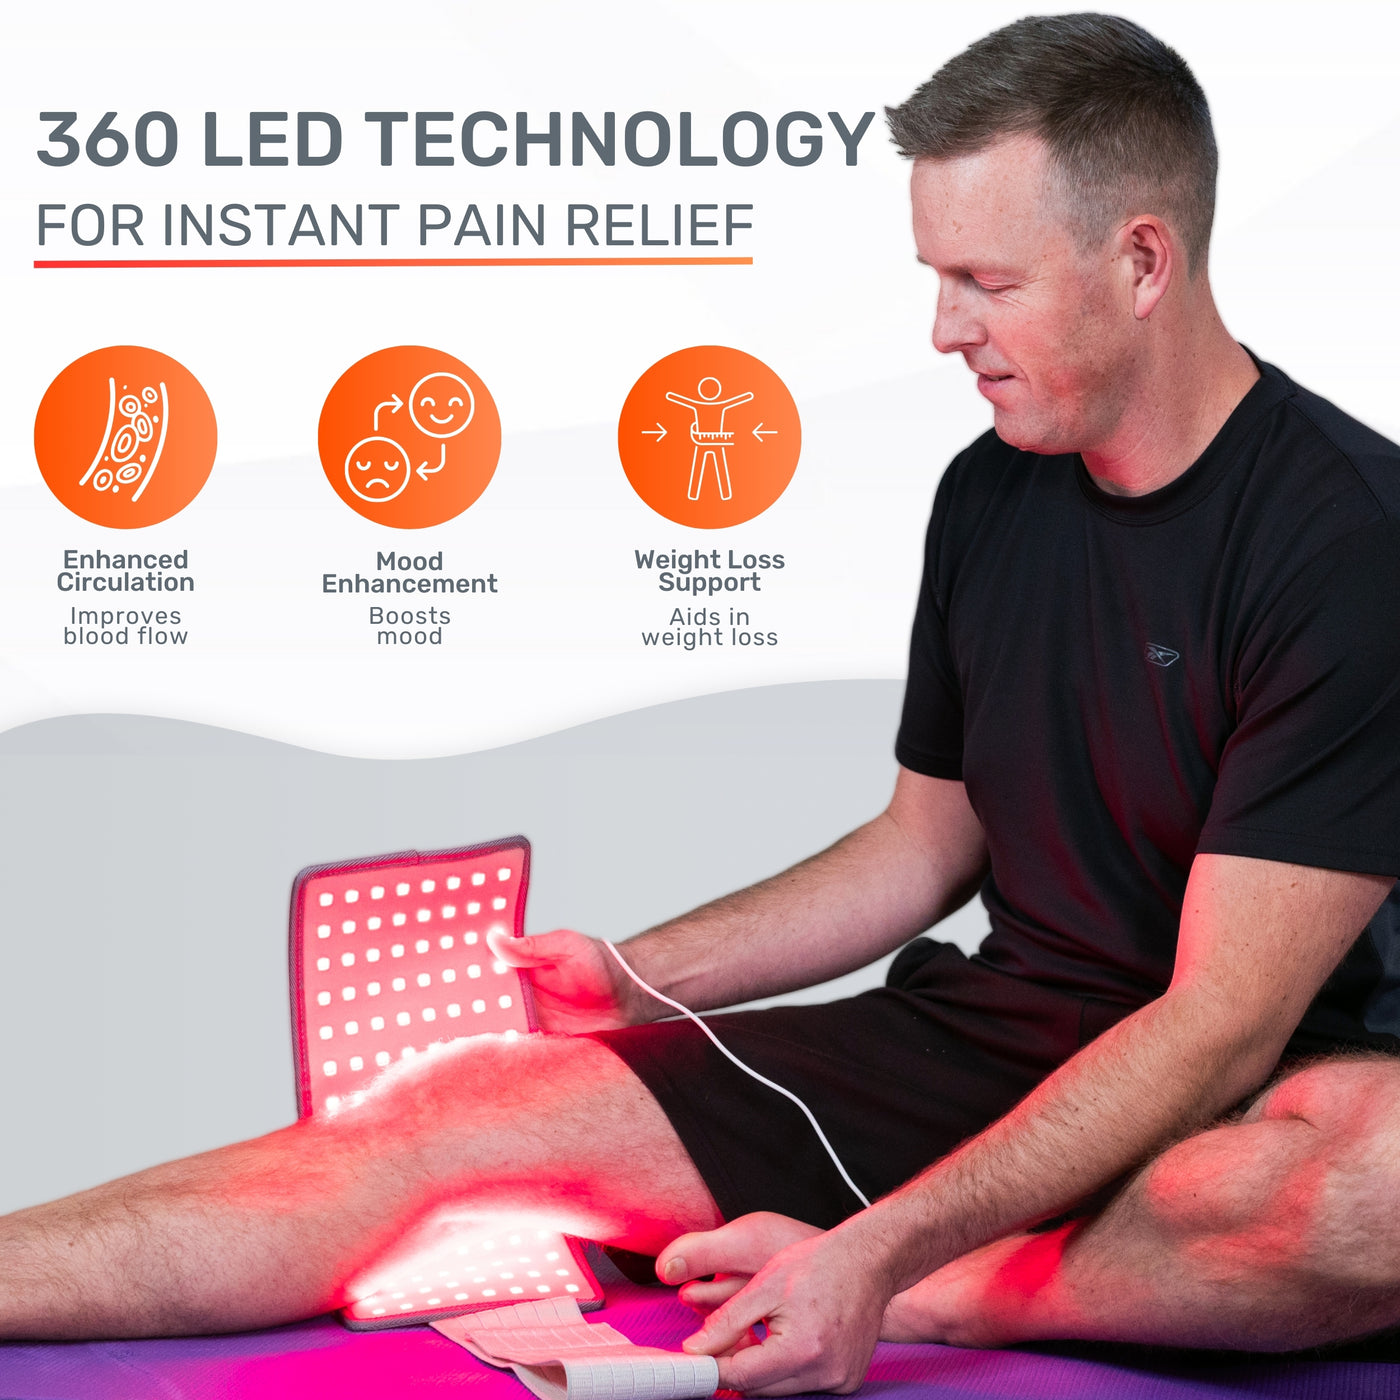 LOOKEE® HealGlow™ Pro Medical Infrared & Red Light Therapy Belt | LED & Infrared Light Therapy Wrap for Pain Relief